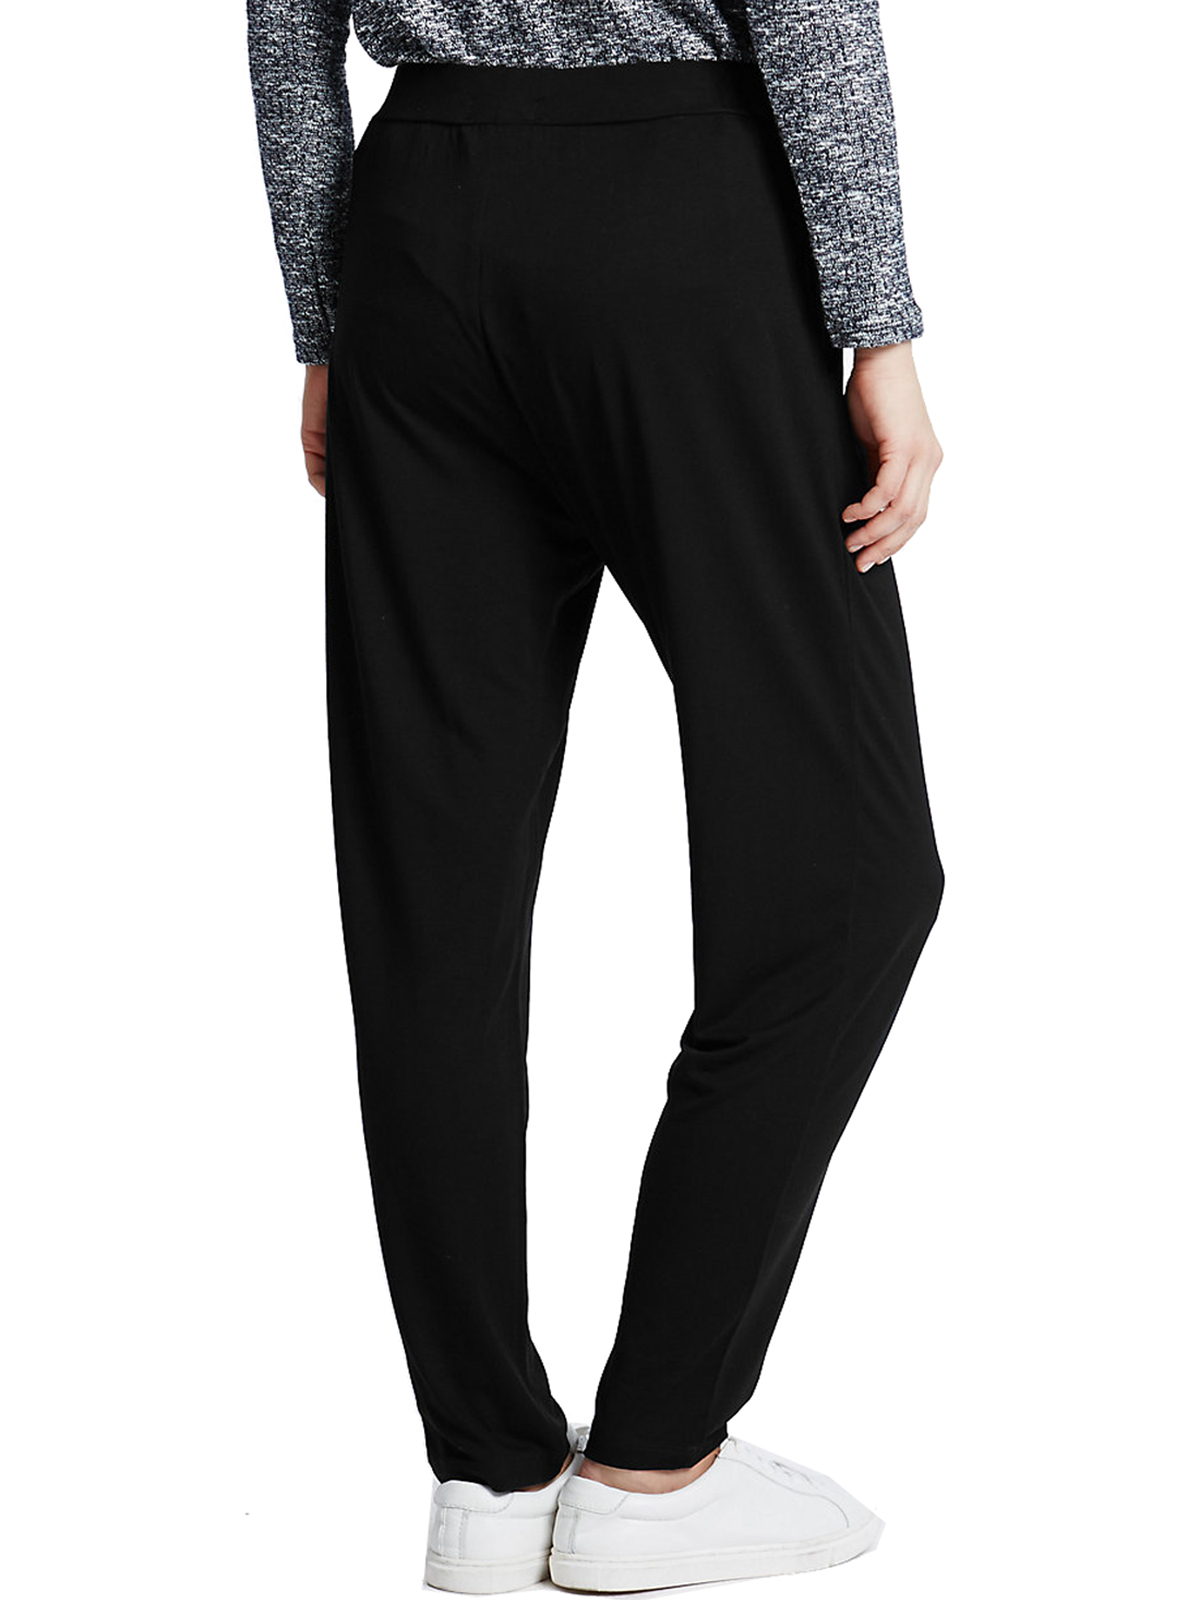 Marks and Spencer - - M&5 BLACK Pull On Tapered Leg Trousers - Size 18 ...